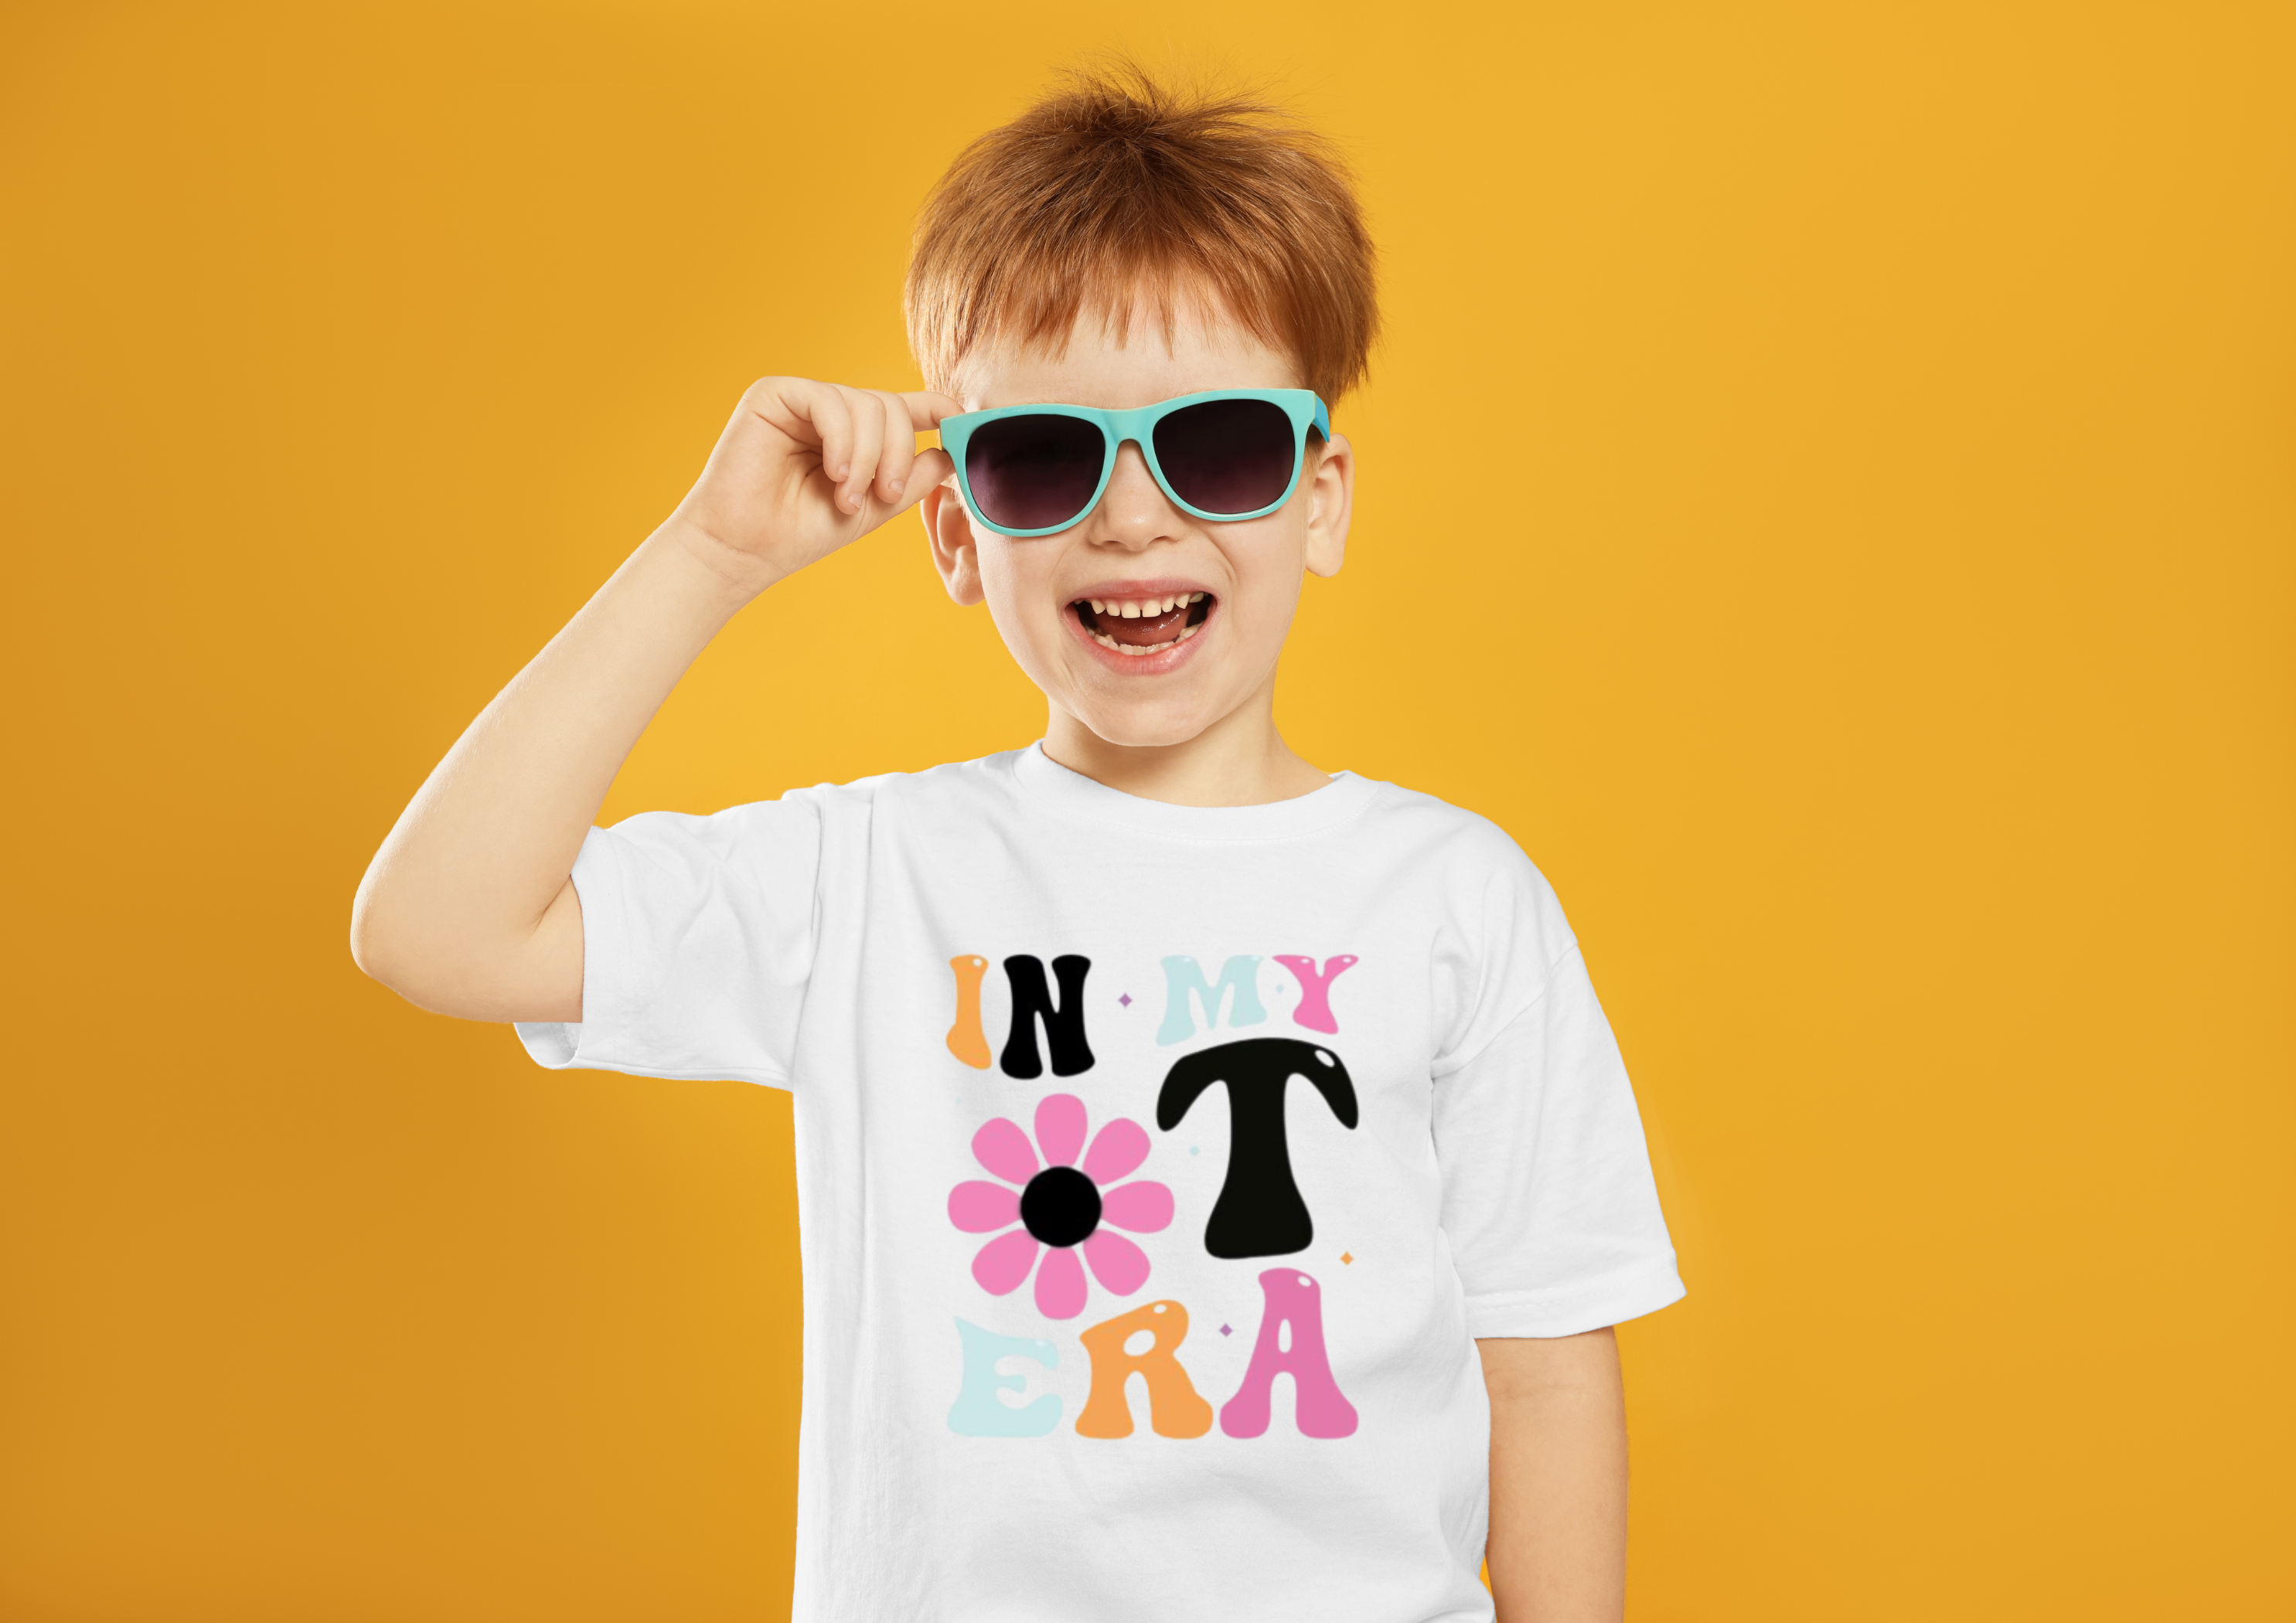 Best Occupational Therapy Shirts for Everyone